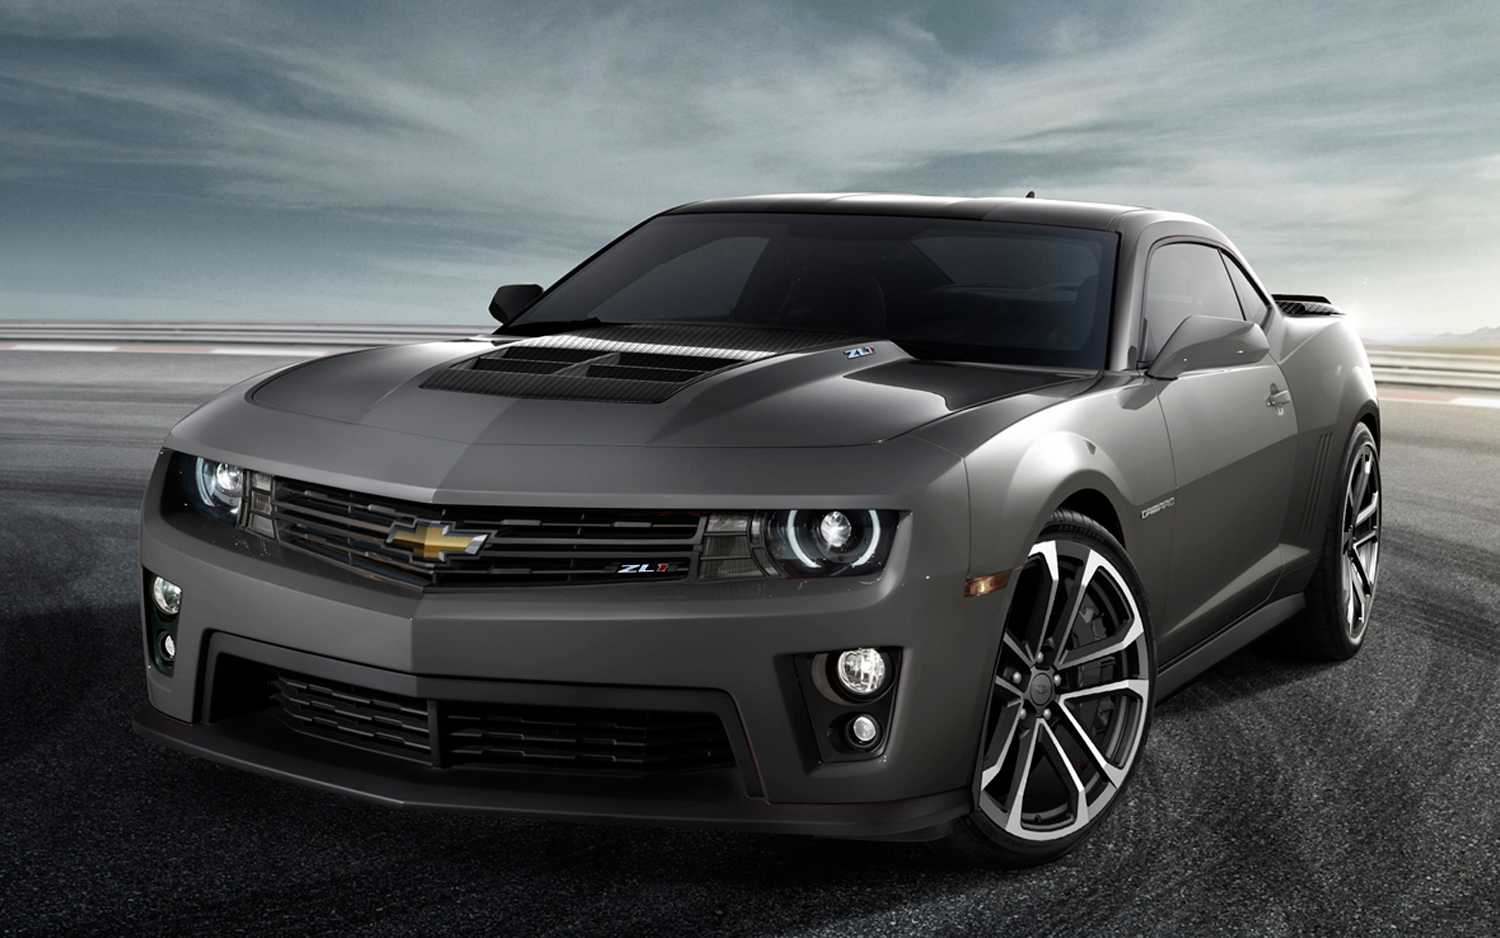 Wallpaper Chevrolet Camaro zl1 red supercar front view 2560x1600 HD  Picture, Image